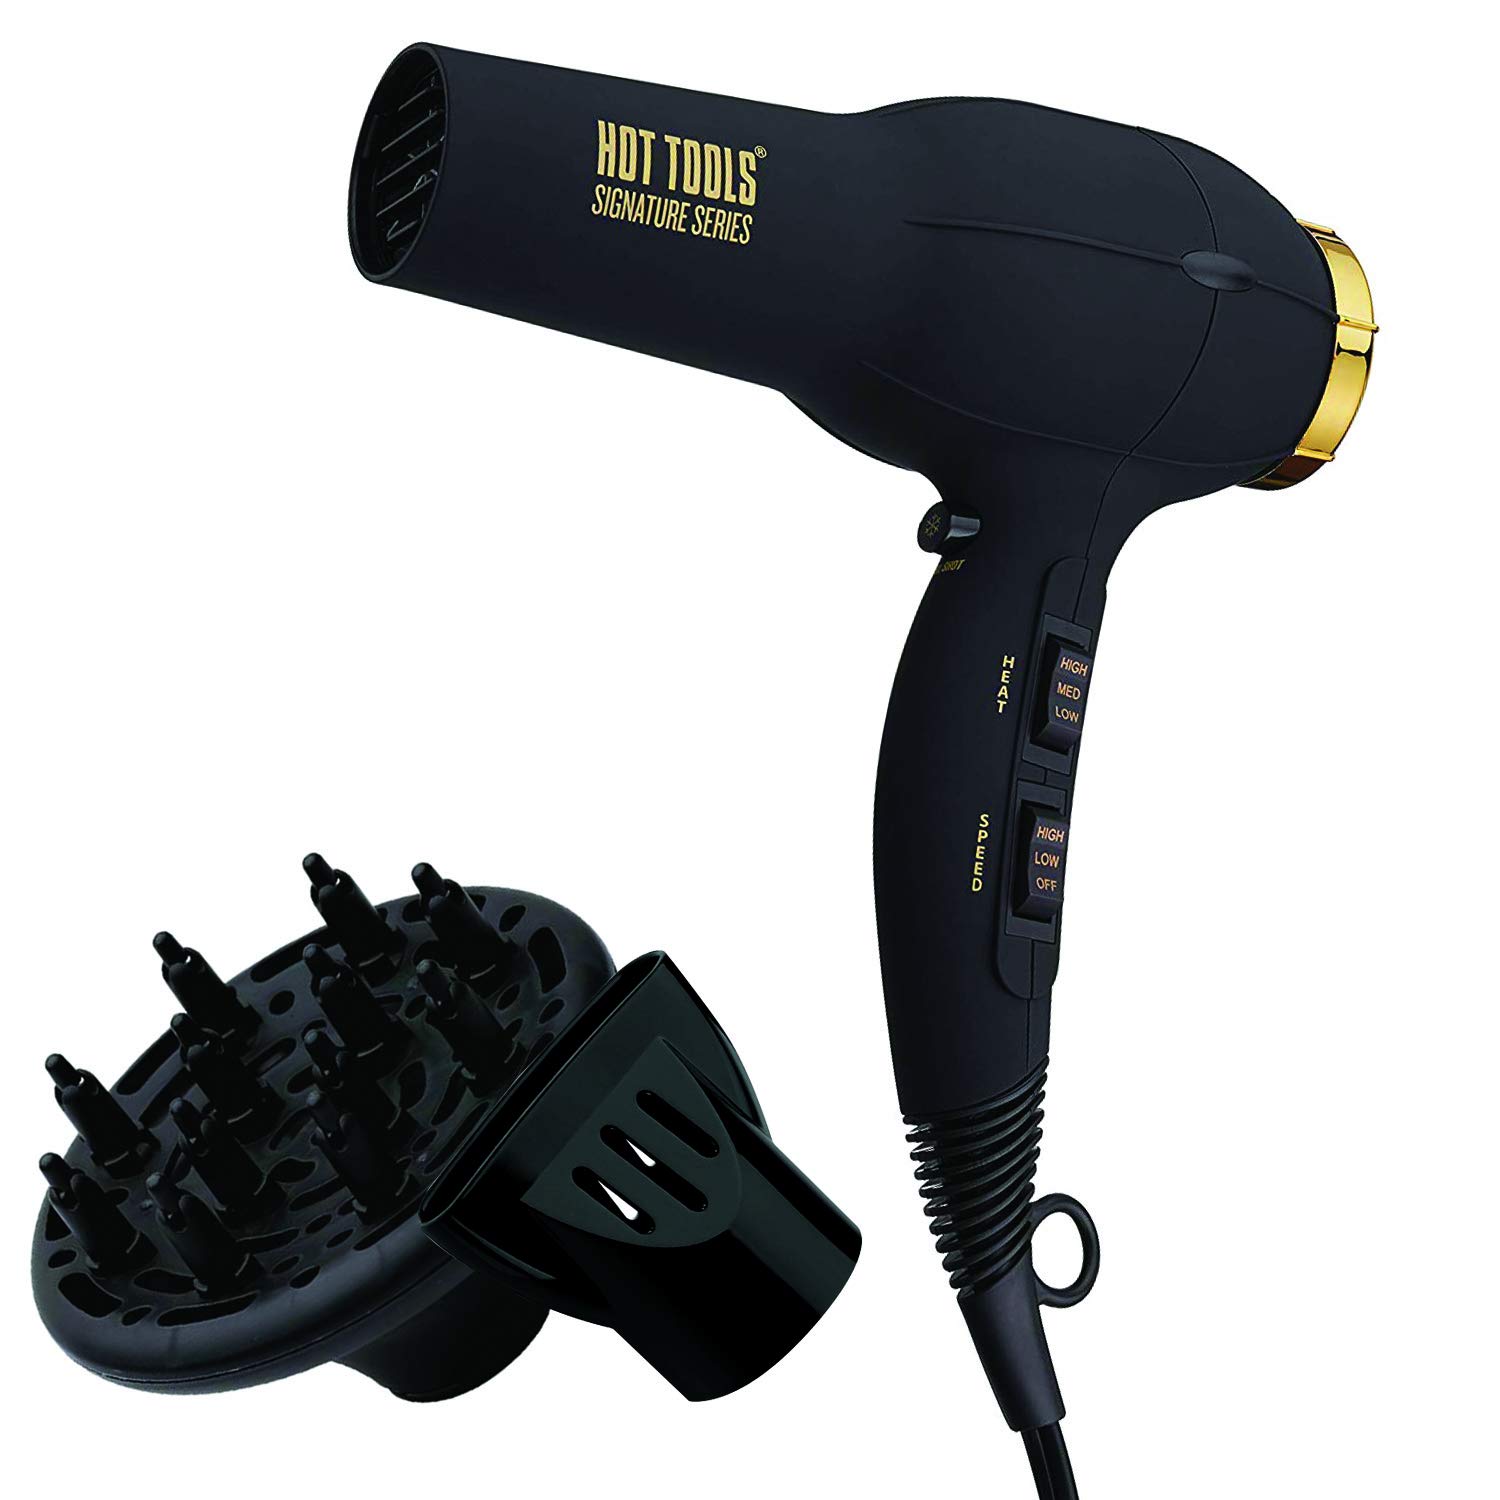 Hot Tools Signature Series Ionic Turbo Hair Dryer $22.50 + Free Shipping w/ Amazon Prime or Orders $25+